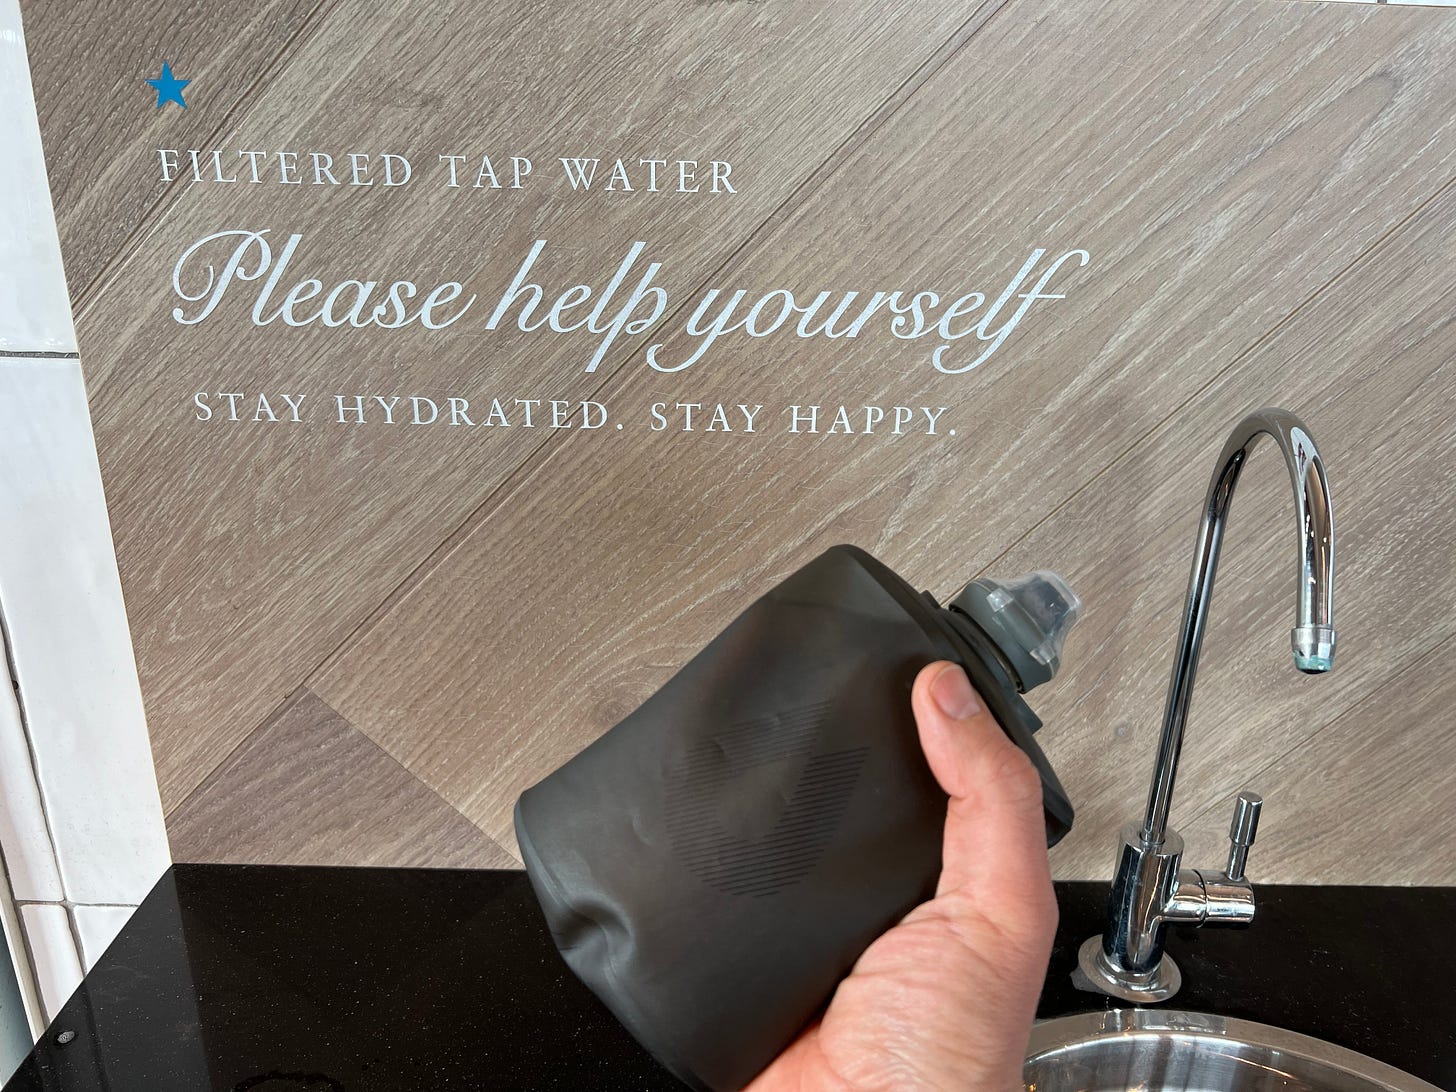 An image of my hand holding a flexible water bag full of fresh drinking water infant of a free drinking water fountain at Pret at the Rugby Services.